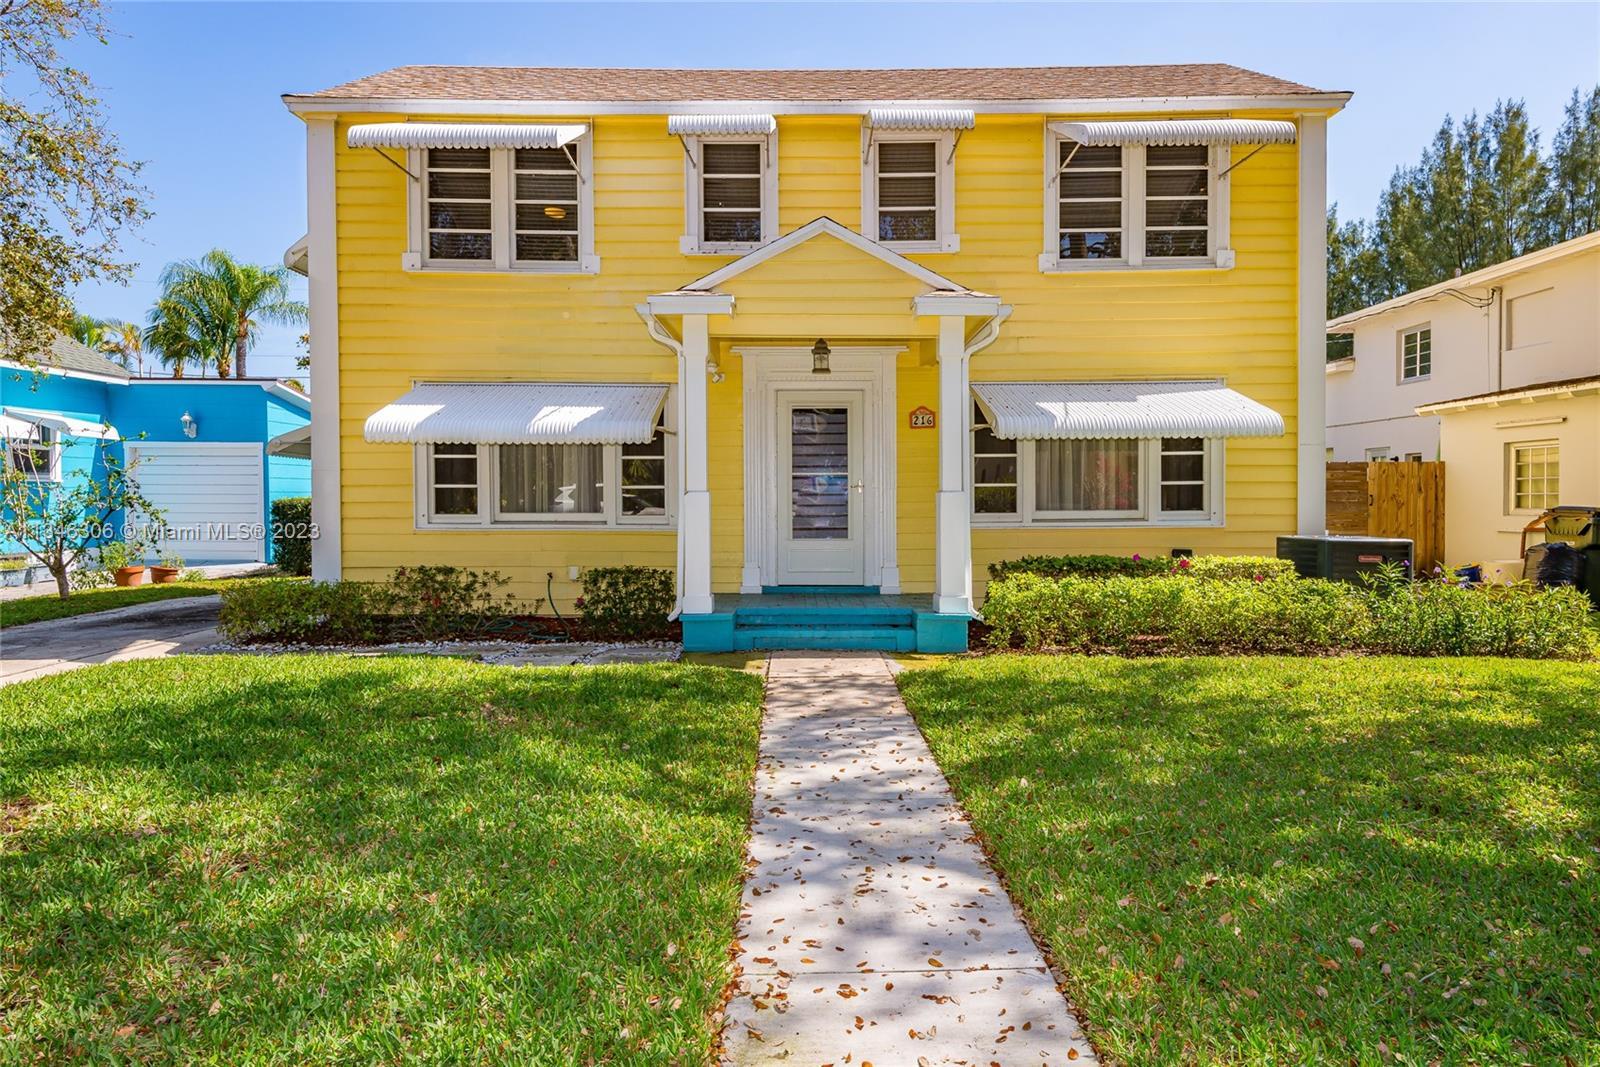 PRICE REDUCTION. Stunning 2-story home located on the scenic Lake Worth Beach Golf Course. This home